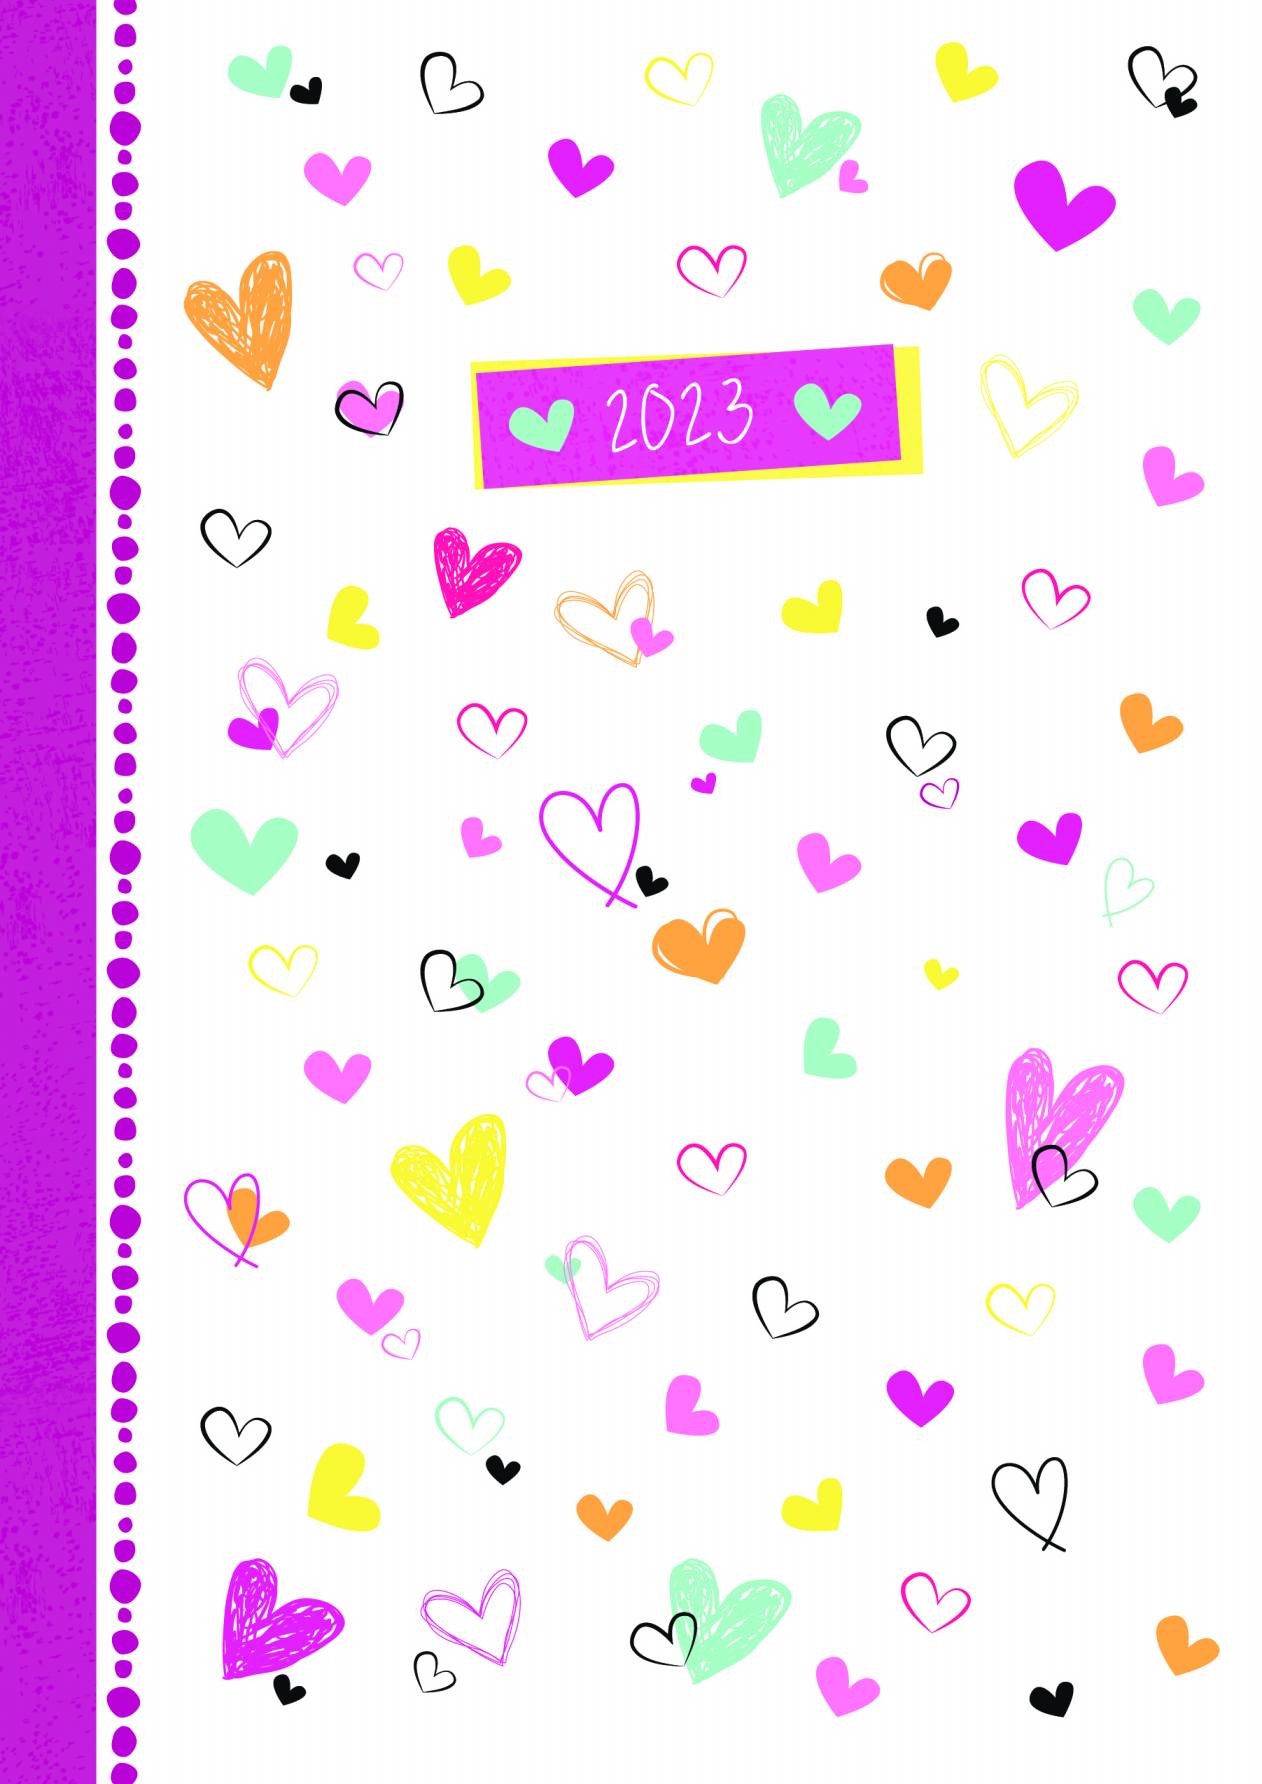 2023 Hearts - Diary/Planner